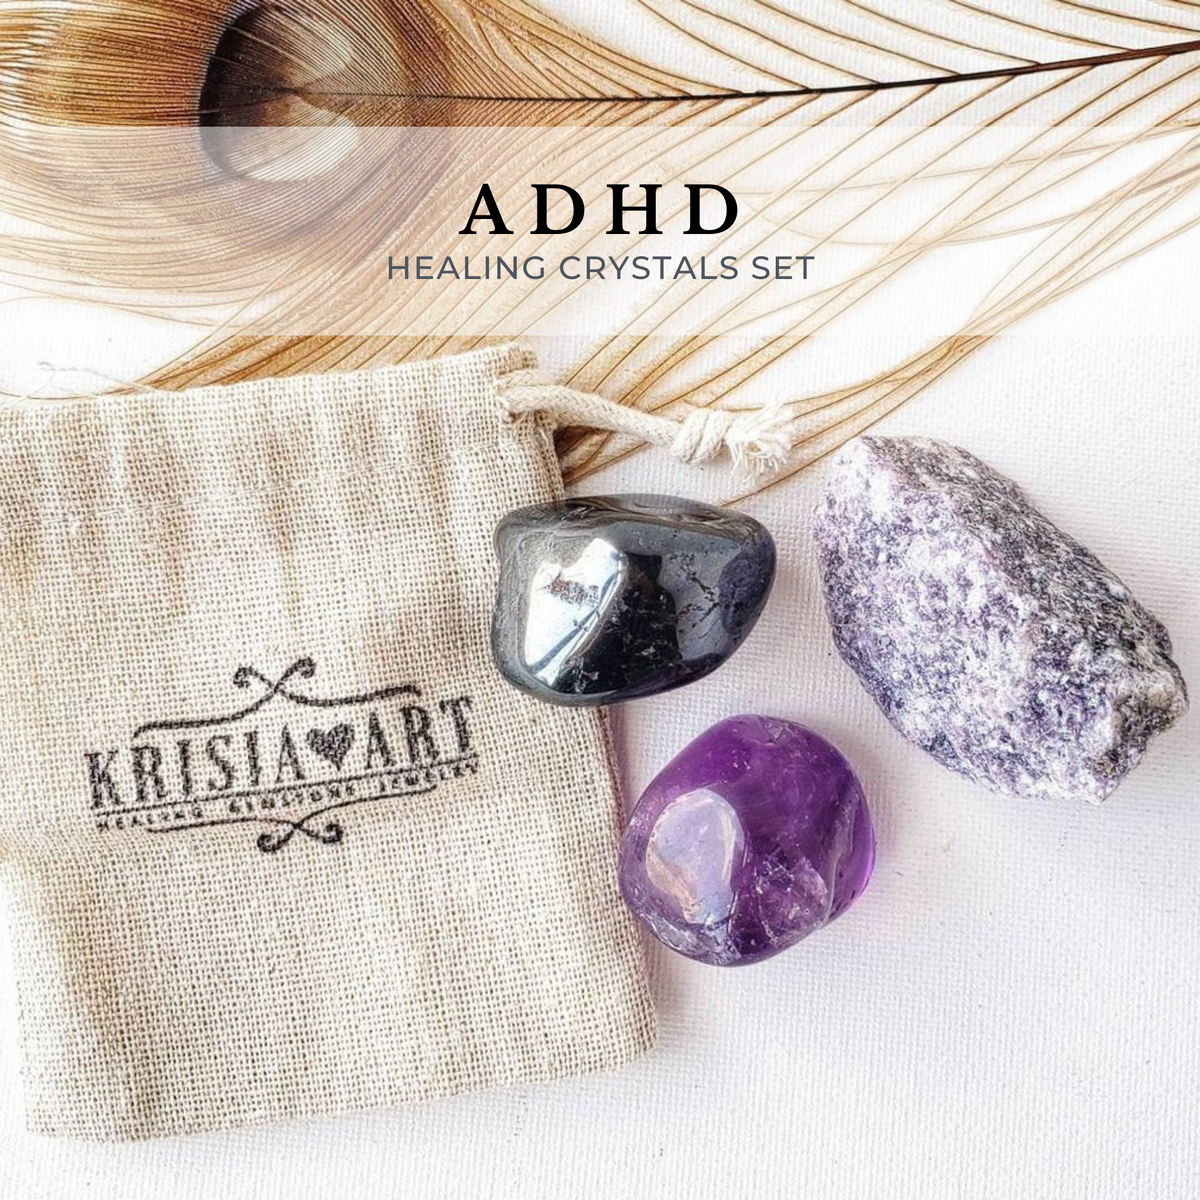 ADHD attention & focus crystal set for concentration, calming exam anxiety and balance. Amethyst, Hematite, Lepidolite 